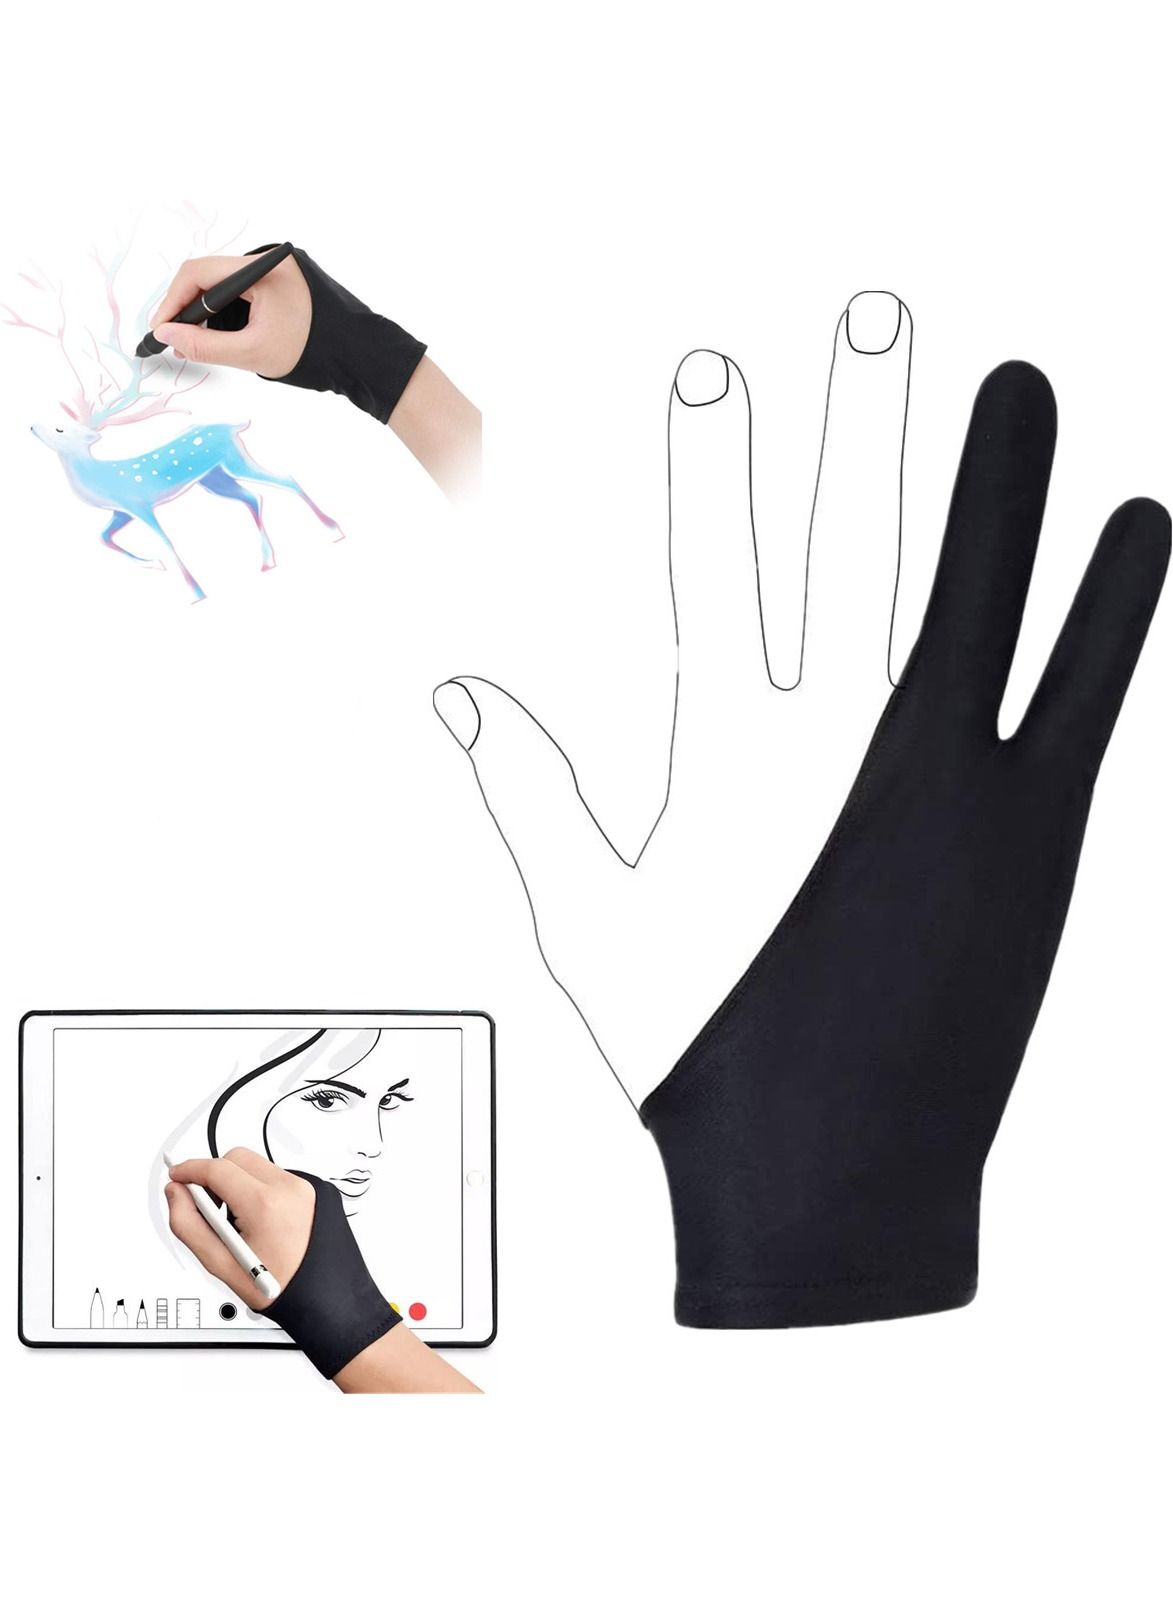 Generic 3-Piece Artist Drawing Two Finger Glove for Paper Sketching, iPad,  Graphics Tablet UAE